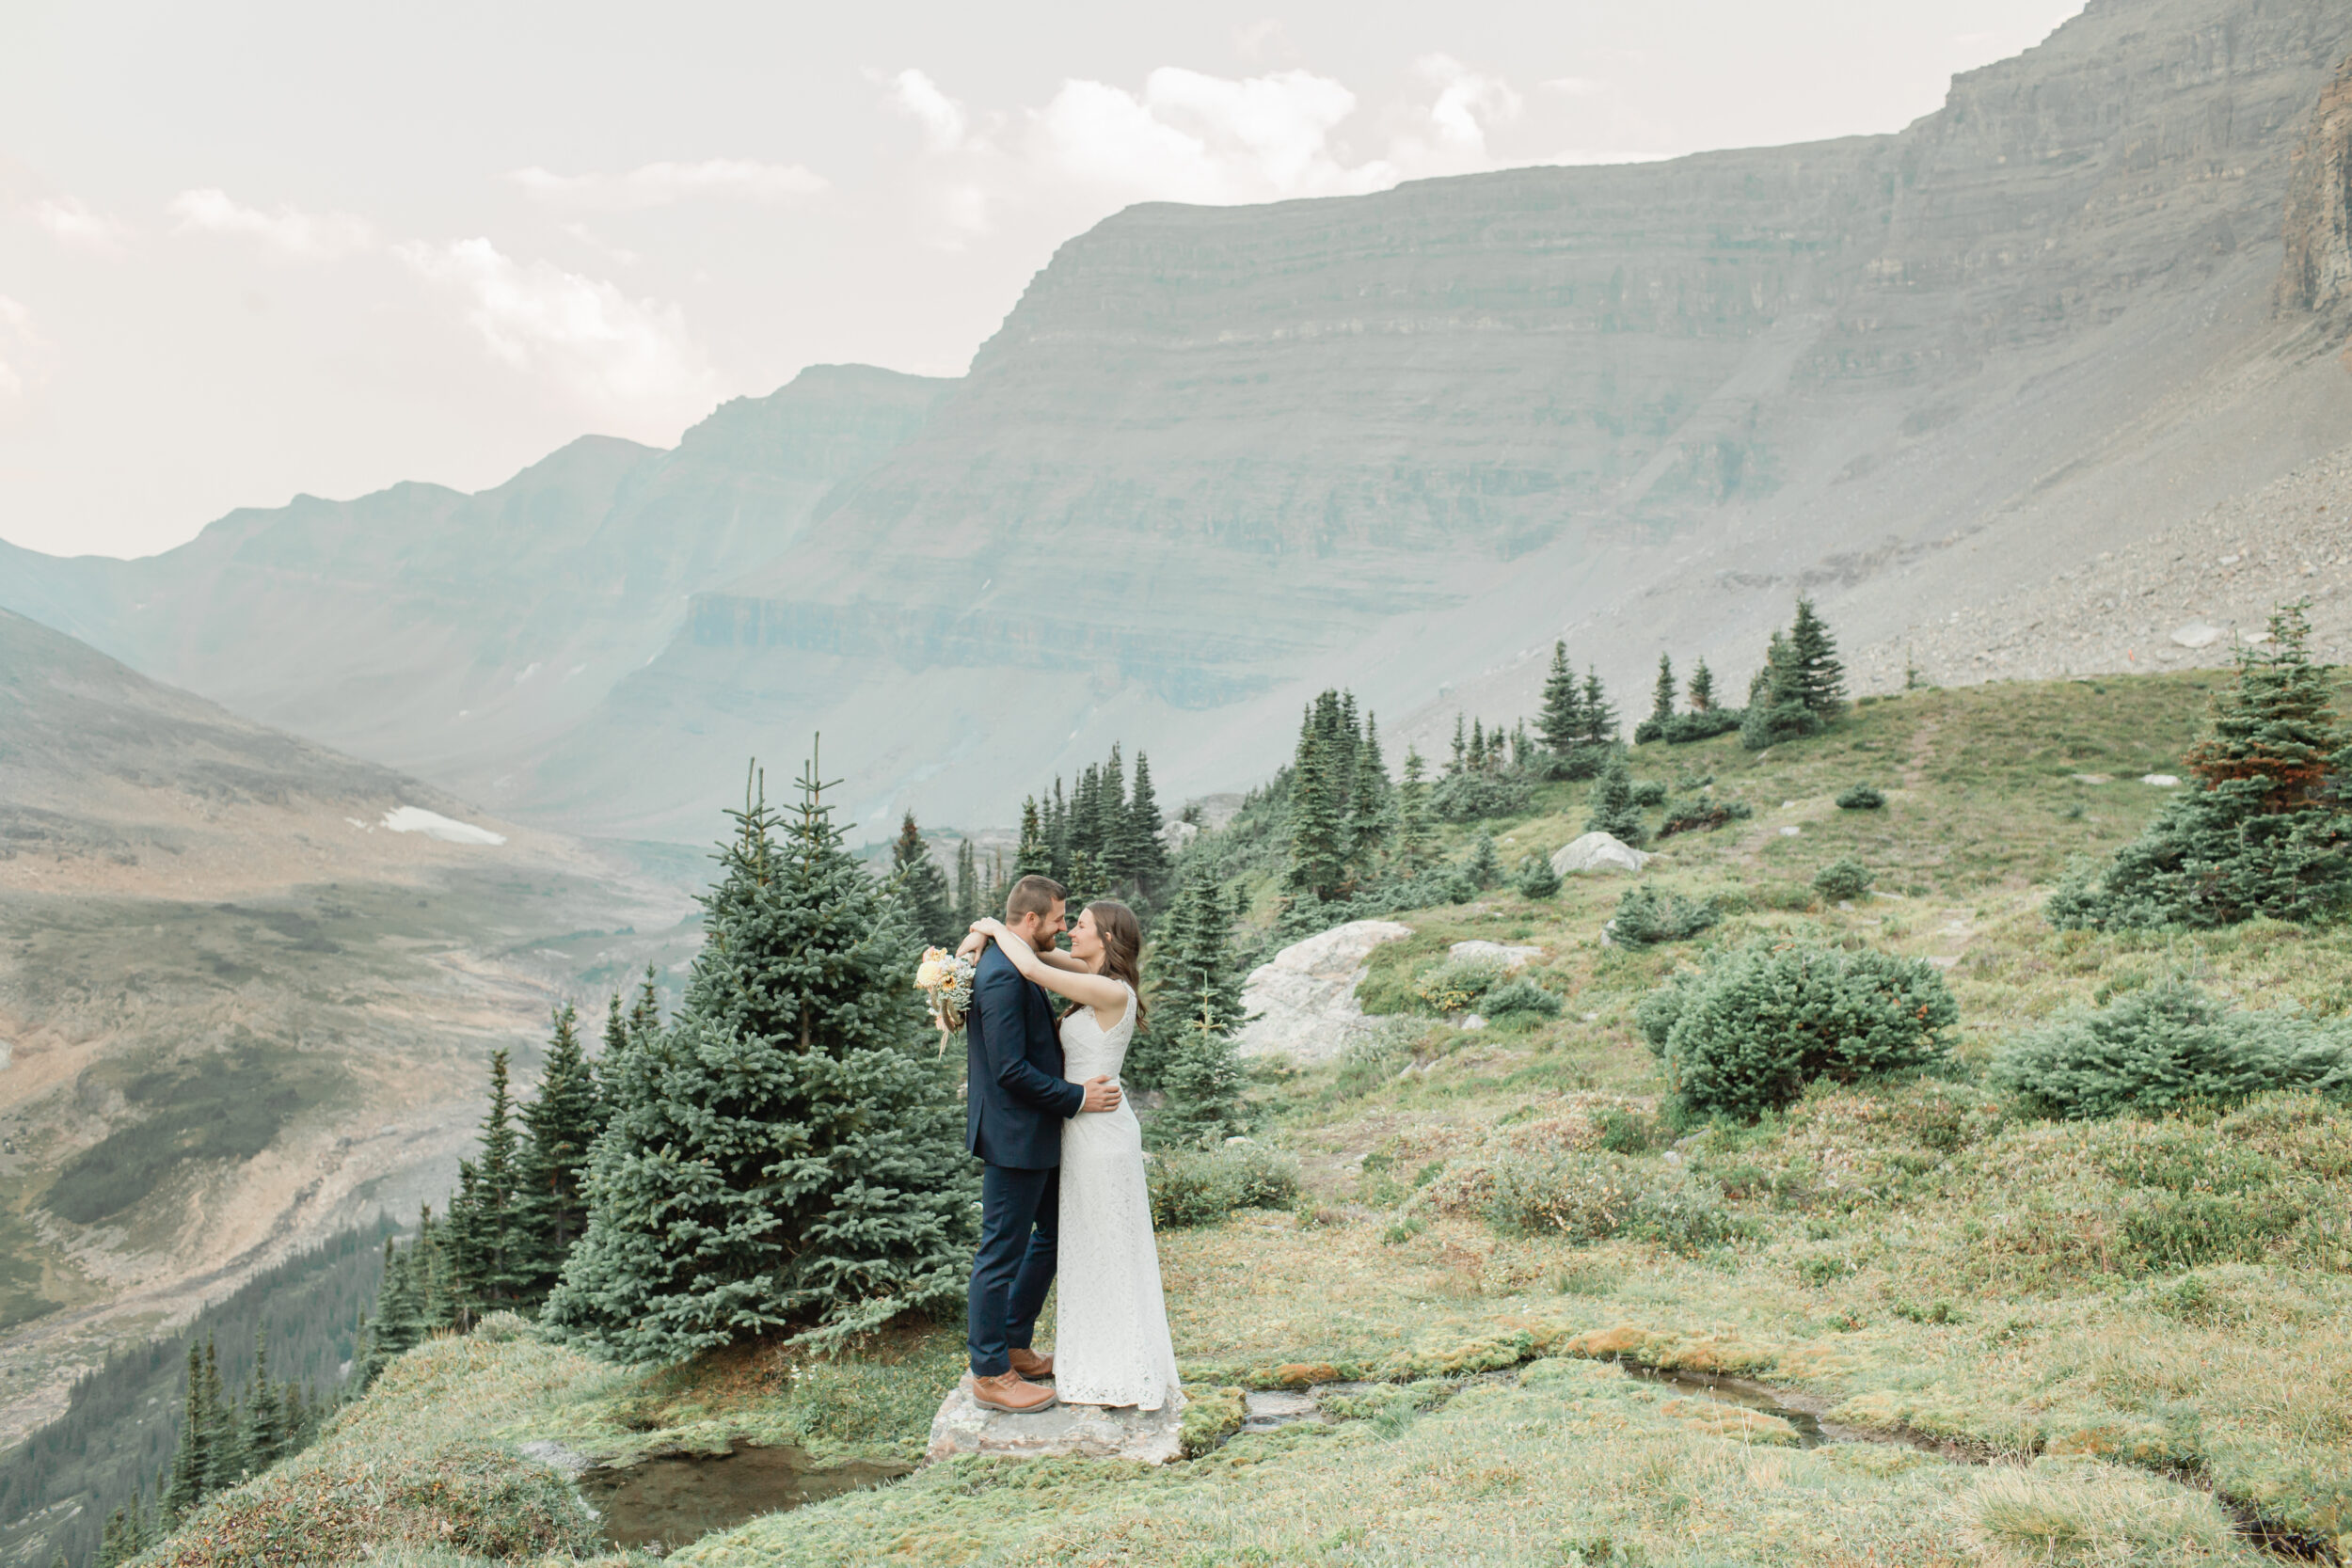 A man and wife share a first dance after their elopement ceremony in Banff.